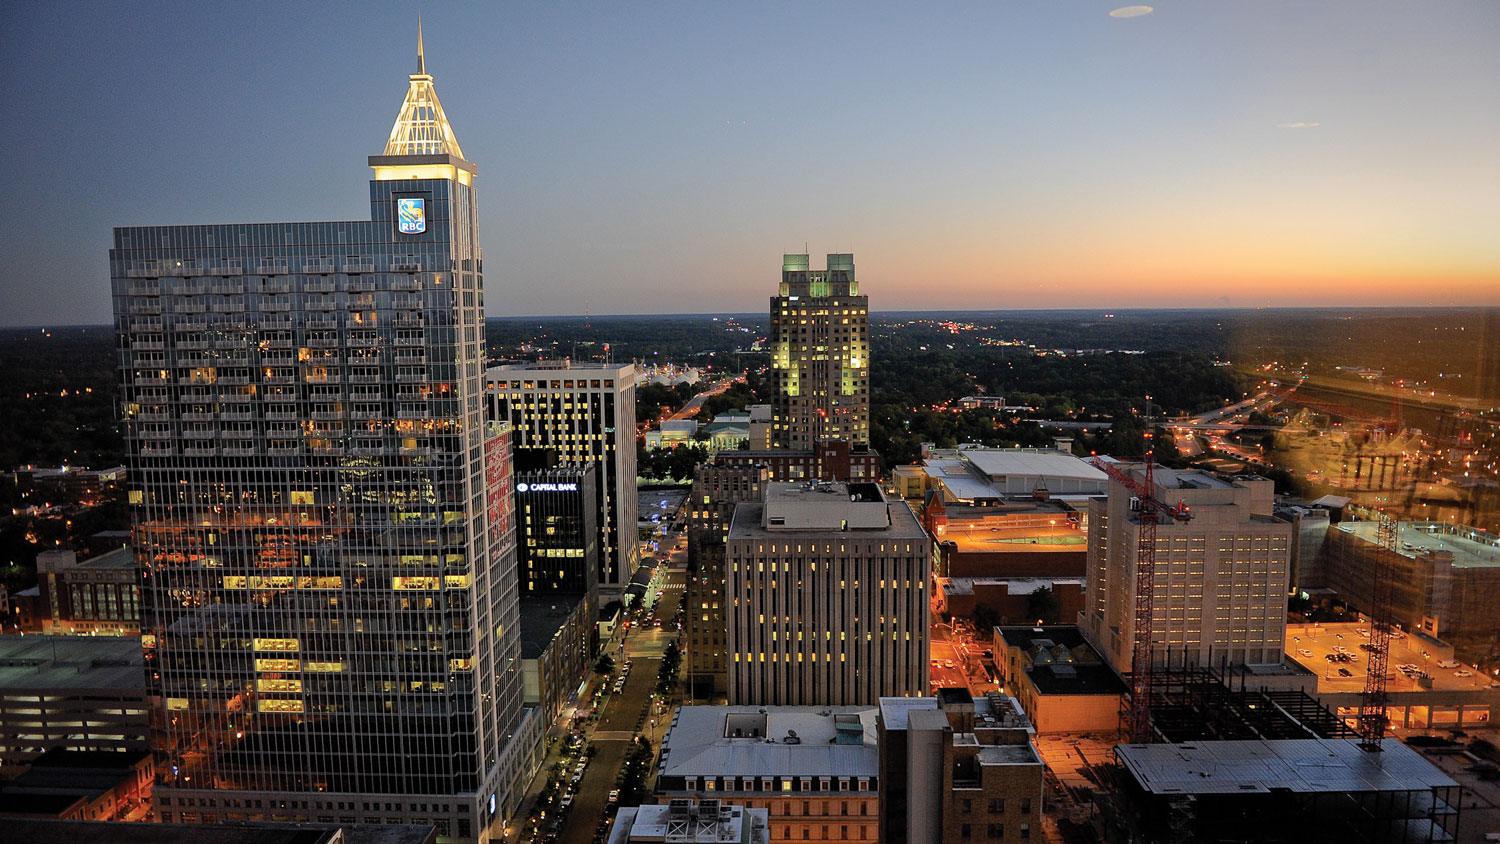 Downtown Raleigh's skyline lights up at dusk.